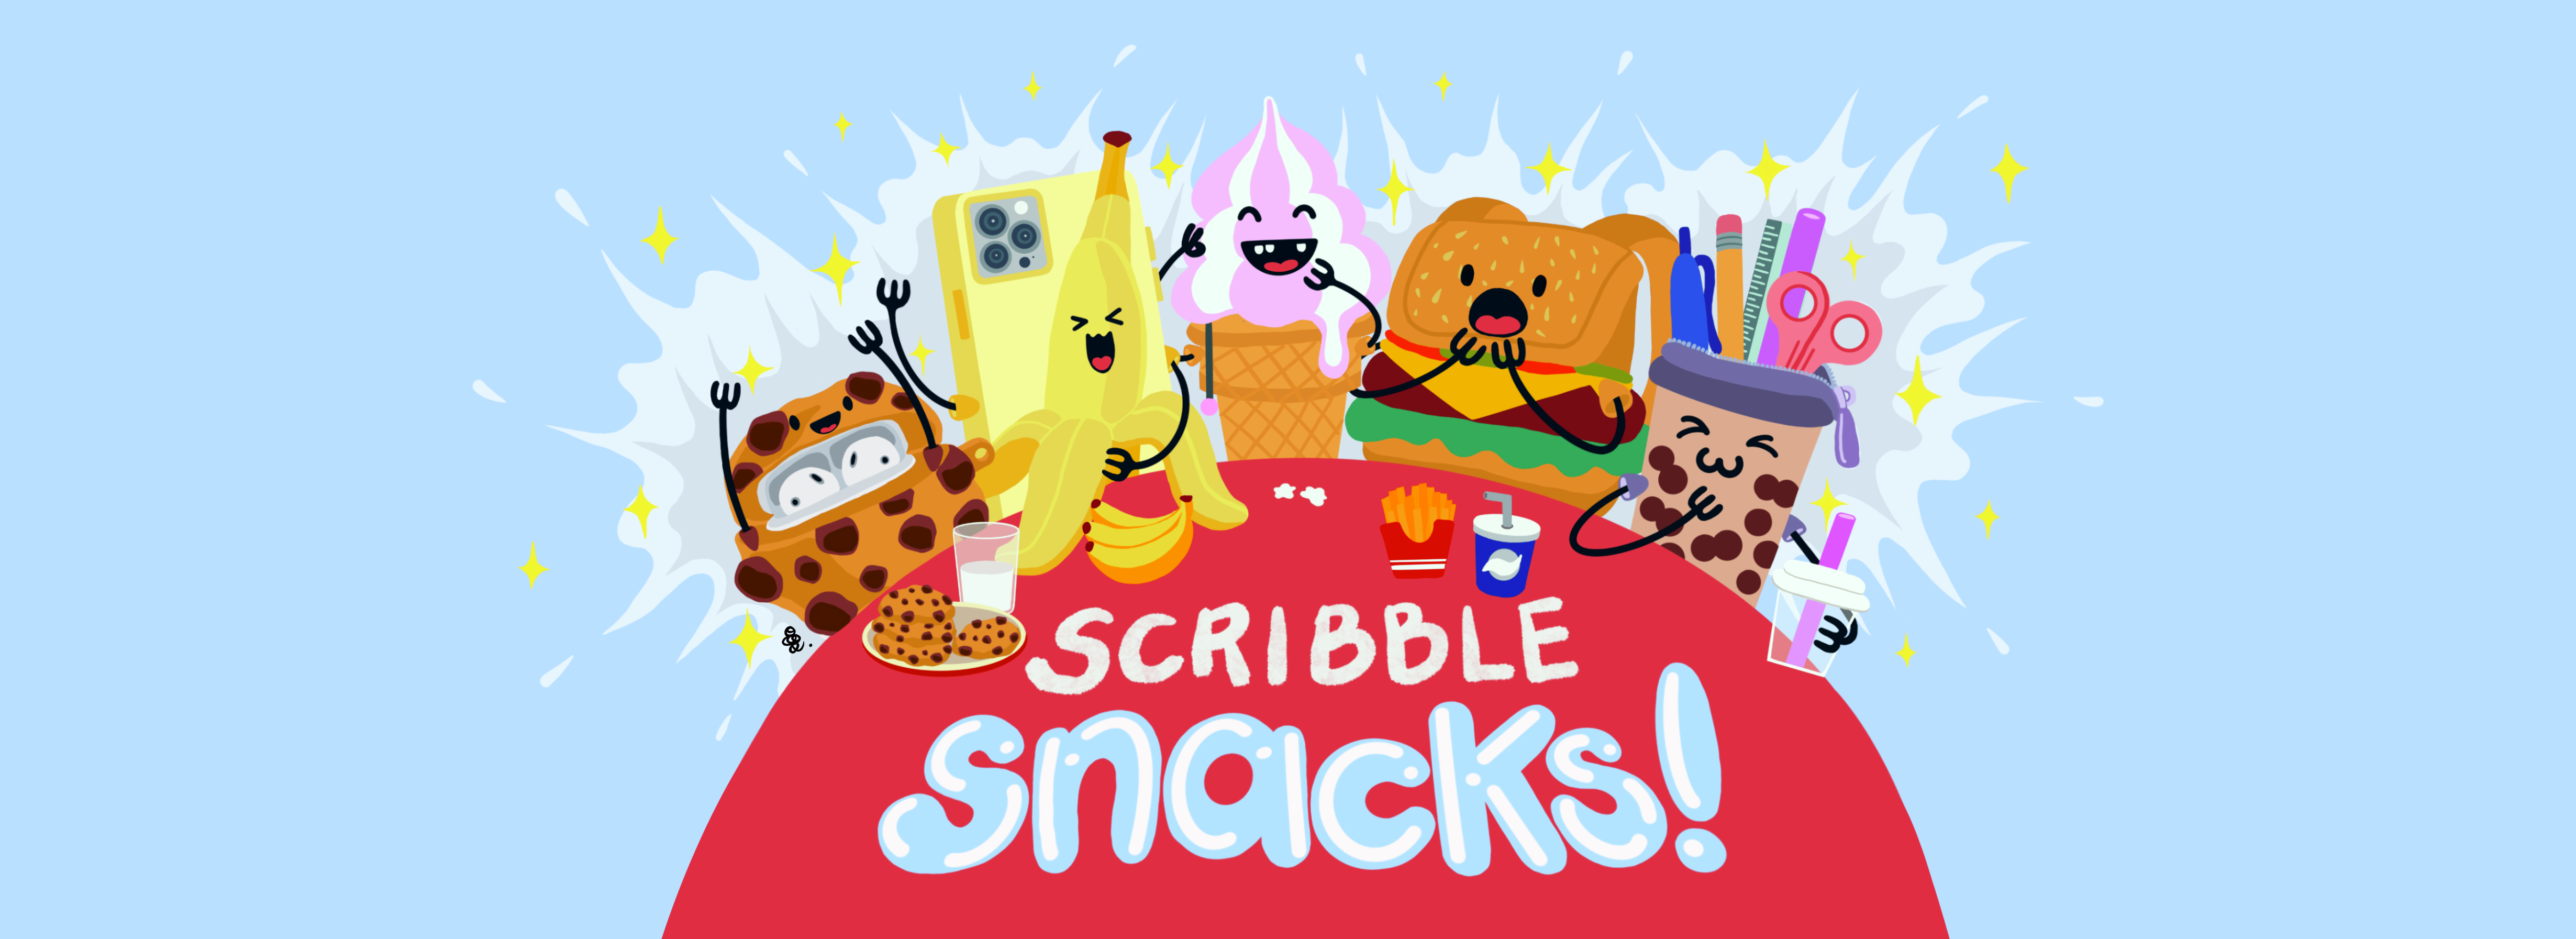 Meet the Scribble Snacks crew, transformed into the munchies they were munching! On a bold red table emblazoned with 'Scribble Snacks!', our characters are reborn as tasty treats: the AirPods case grins wide as a cookie, the phone case waves excitedly as a ripe banana, the lamp shines bright as a beaming ice cream cone, the backpack squeals in delight as a stuffed hamburger, and the pencil case slurps boba with a smile. Behind them, a playful magic cloud, adding a dash of fun to the scene.